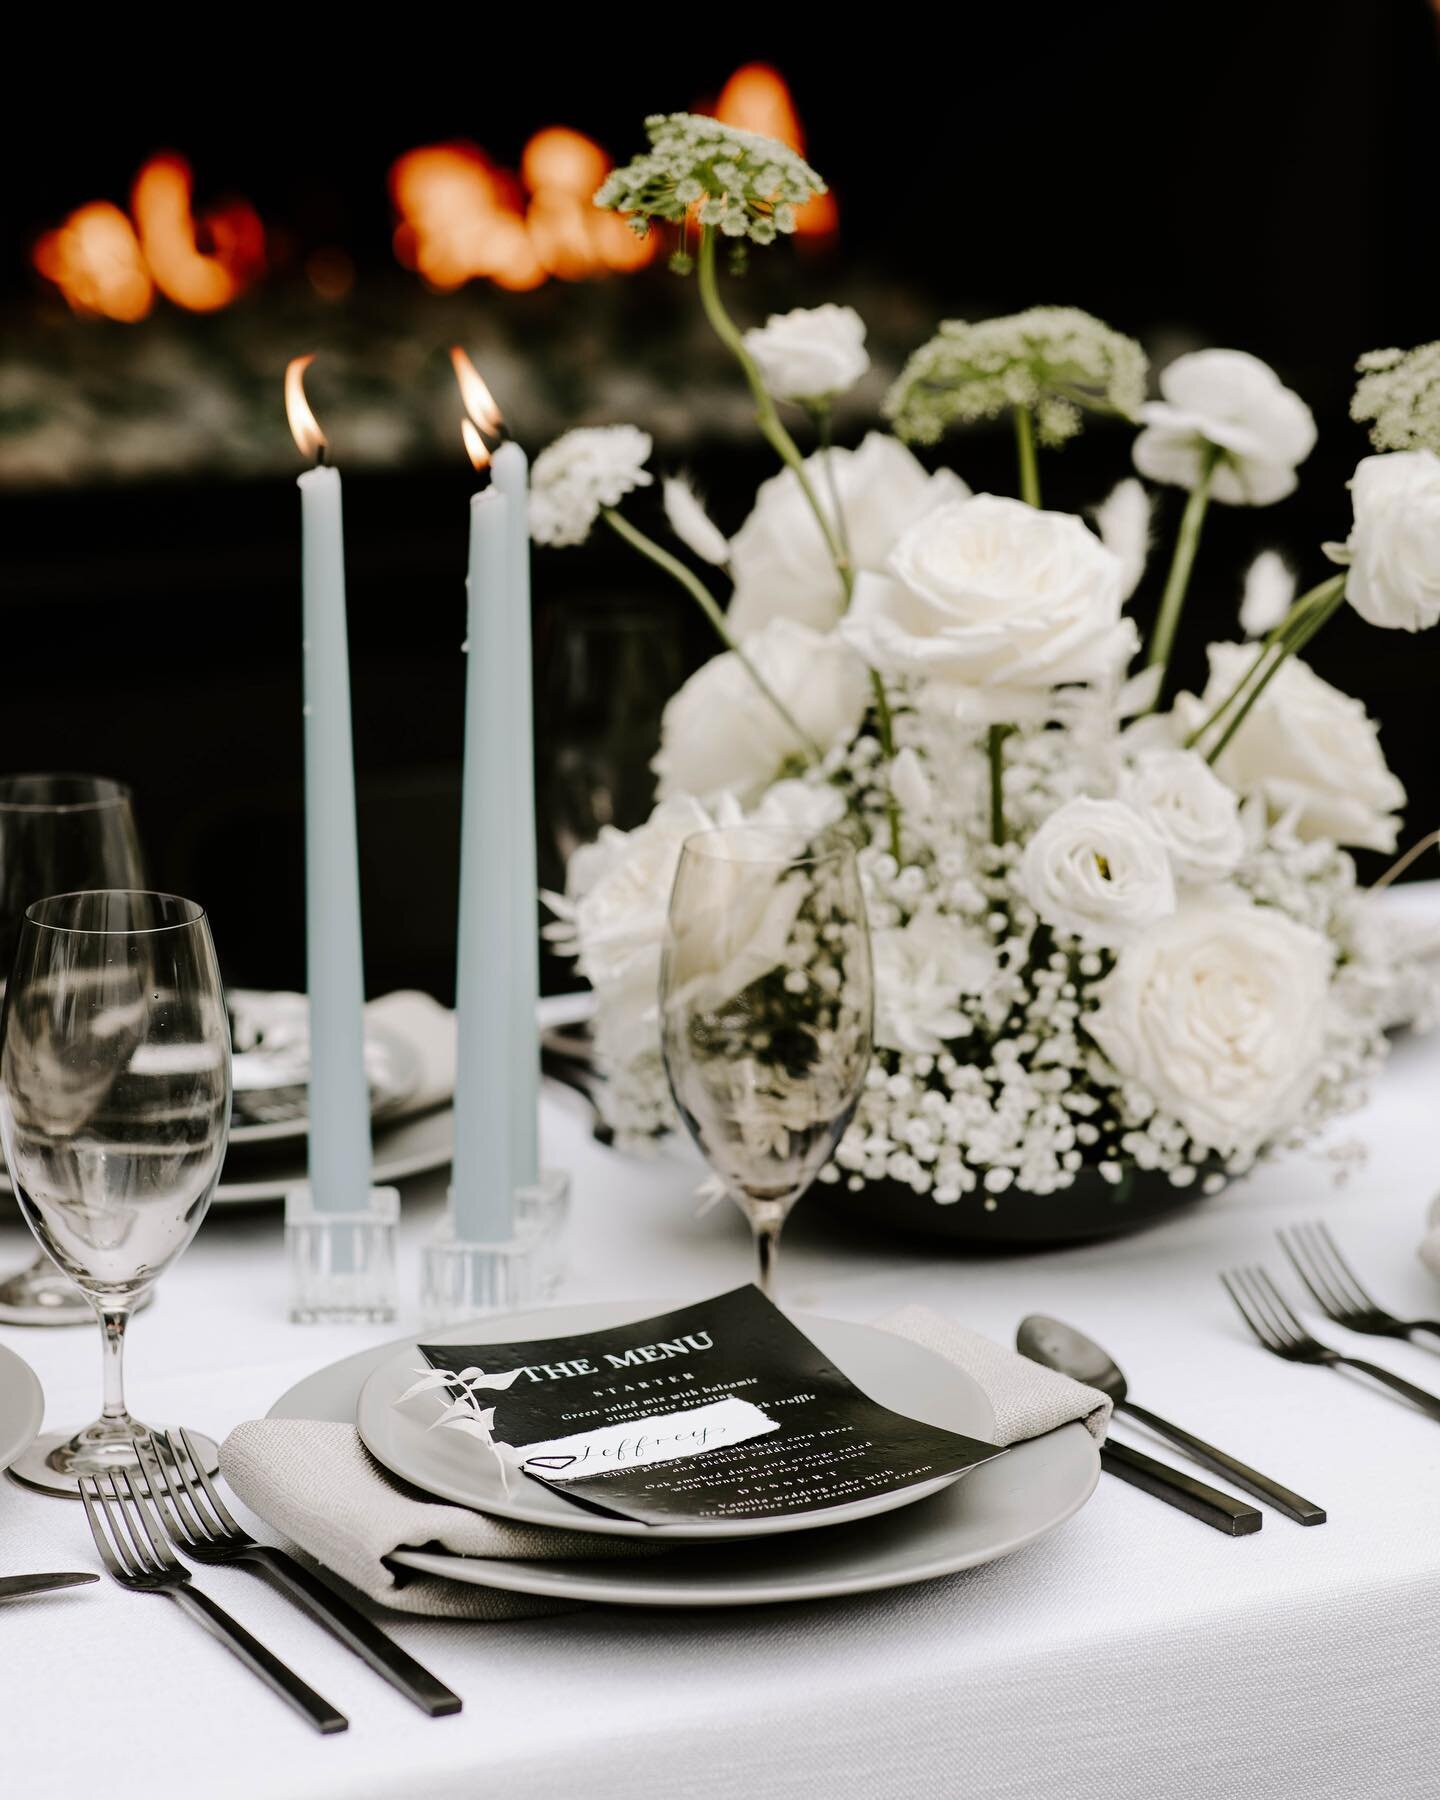 What do you think of this modern sleek design? The fireplace sold me on this space! 

I love the way these dark elements popped on the bright white linen🖤 

Photo: @gabriellevonheykingweddings 
Florist: @flowergirlsfloraldesign
Rentals: @pleasebesea